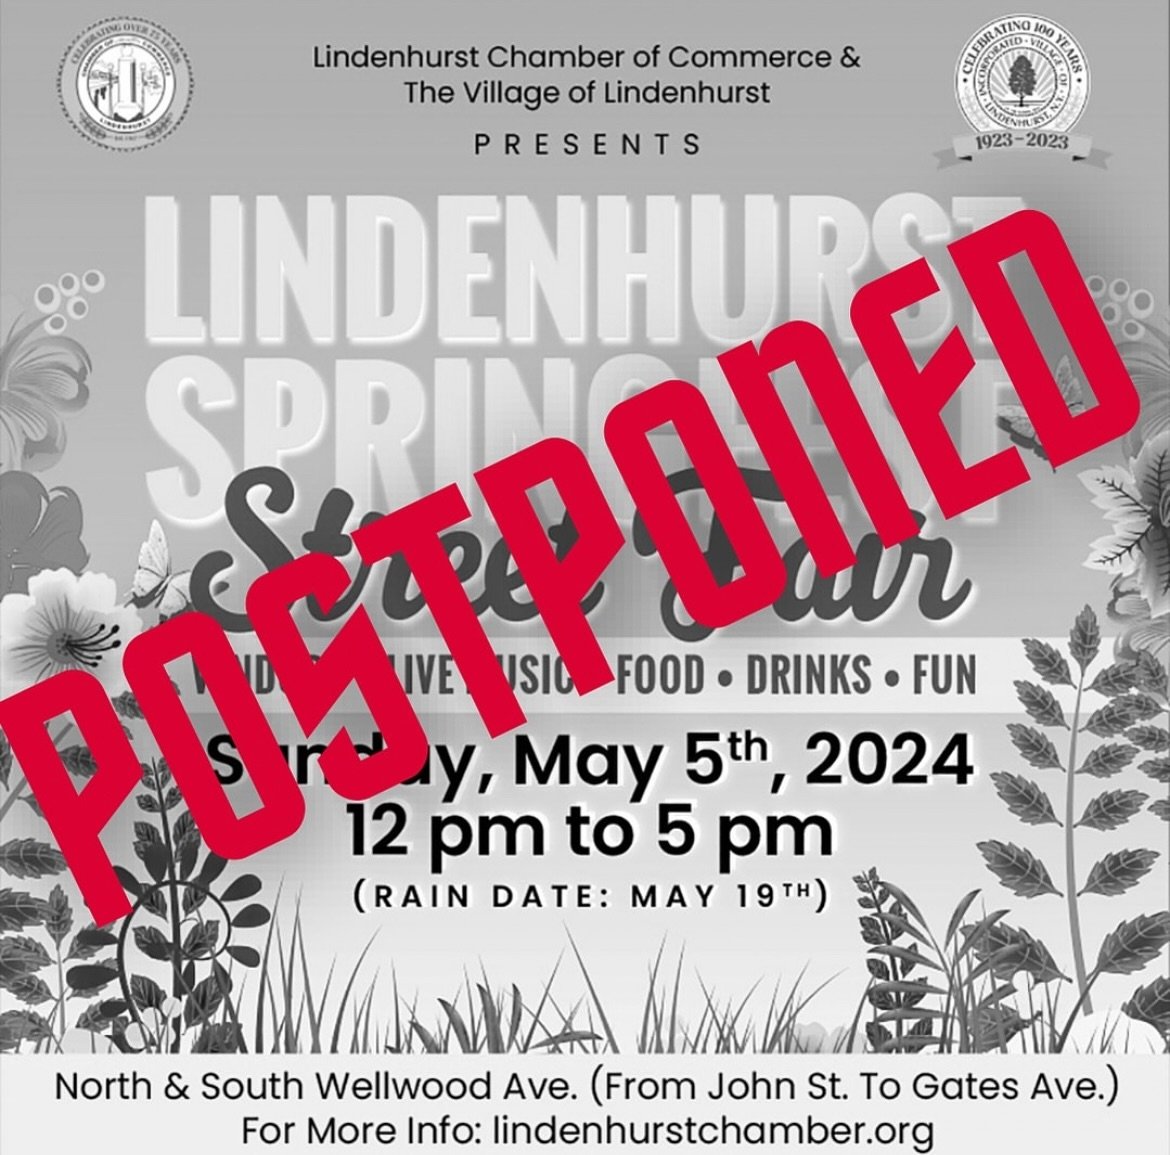 The weather is looking less than ideal for Sunday, but have no fear, @lindenhurstchamber Spring Fest will be back May 19th !! 🌸🍻✨